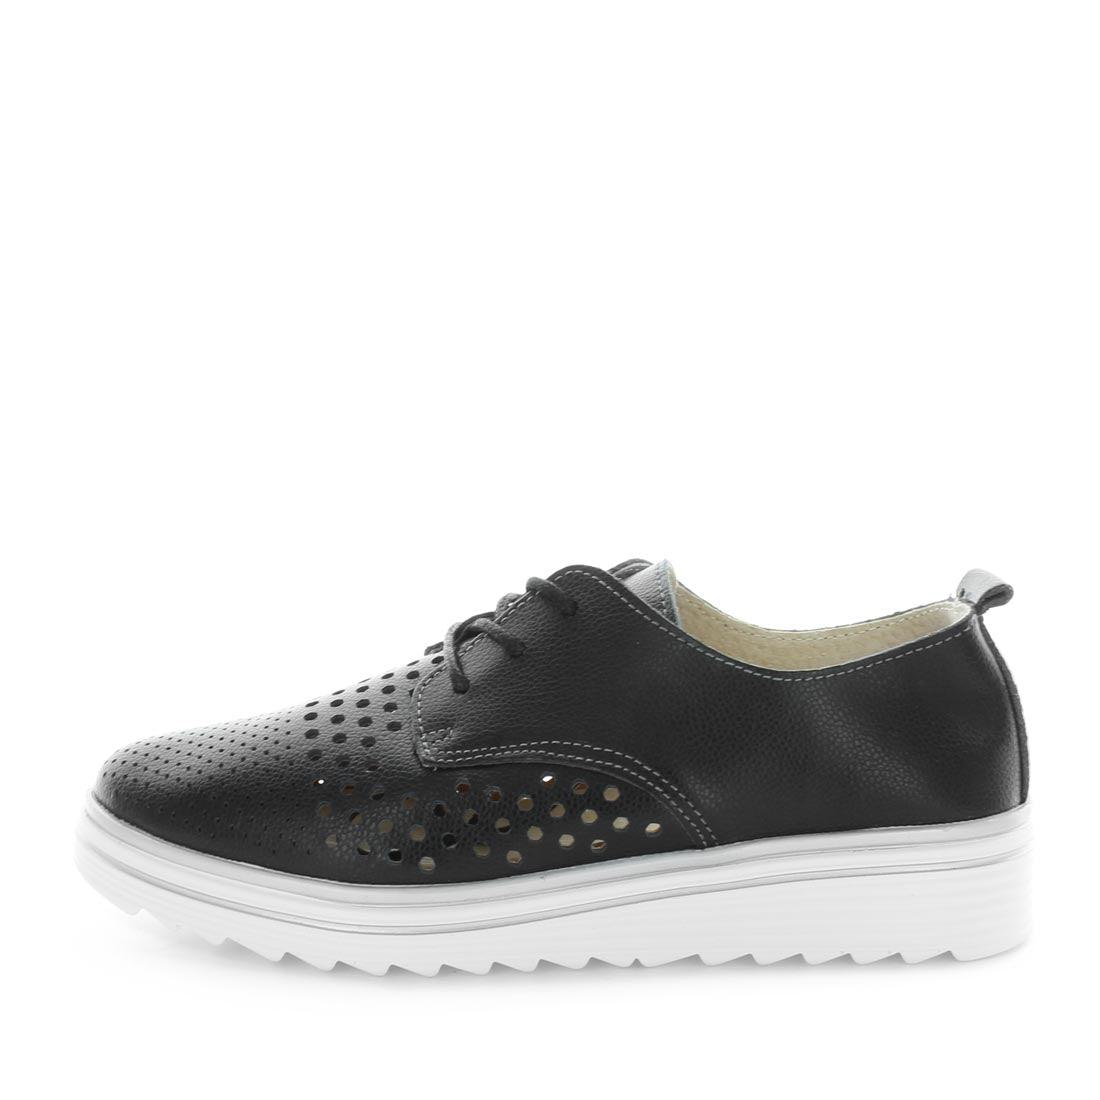 Caity, just bee, just bee comfort, leather women's comfort shoes, leather comfort sneakers, ladies sneakers, leather ladies flats, women's leather flats, comfort lightweight leather flats with leather padded insole and sock for comfort (7553236173033)